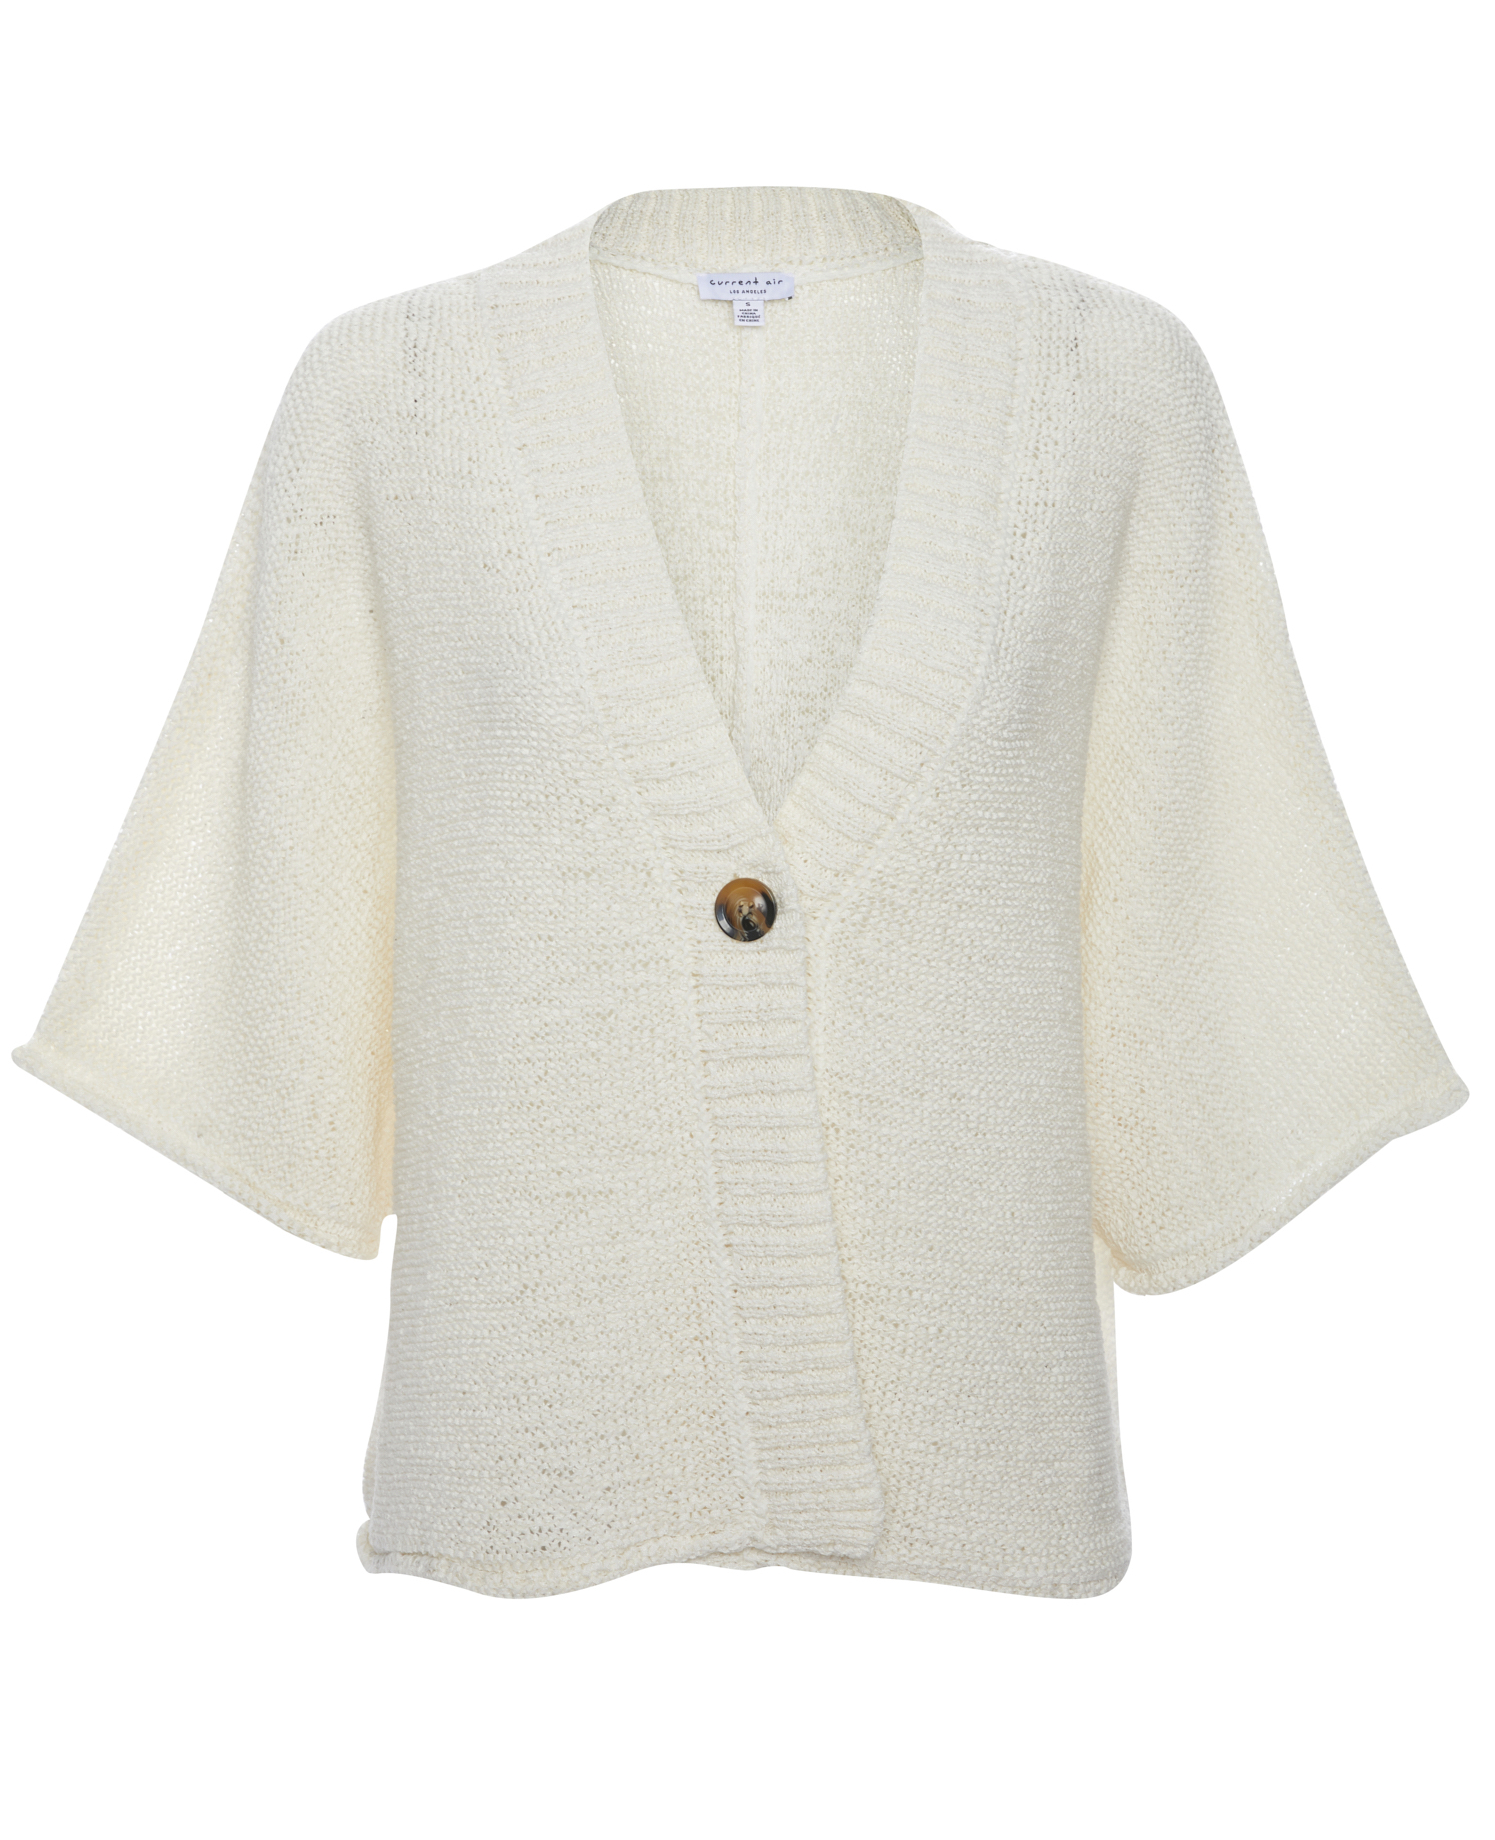 Current Air Open Knit Cardigan in Ivory | DAILYLOOK